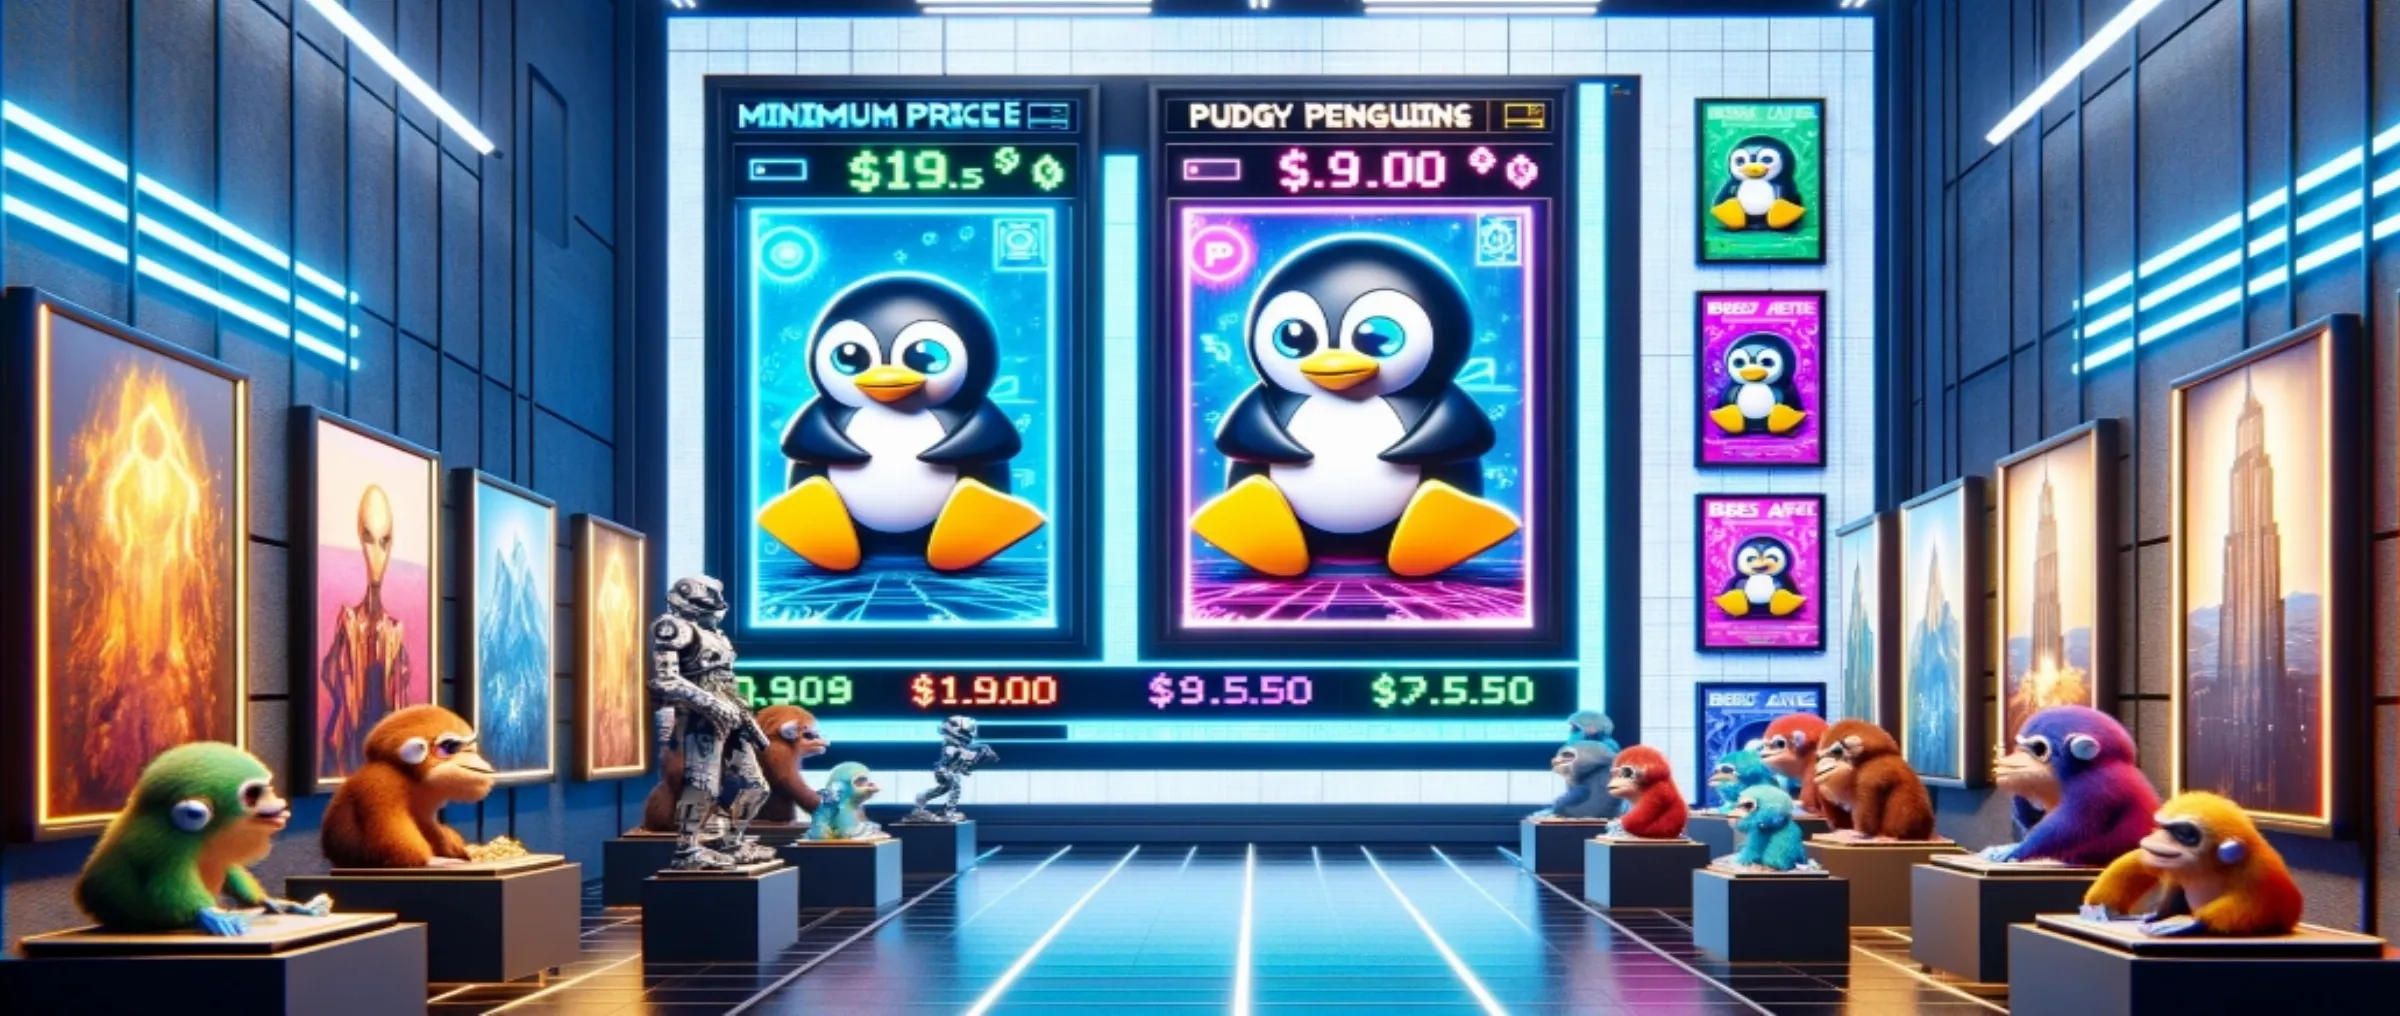 The minimum cost of the Pudgy Penguins NFT collection has exceeded the BAYC